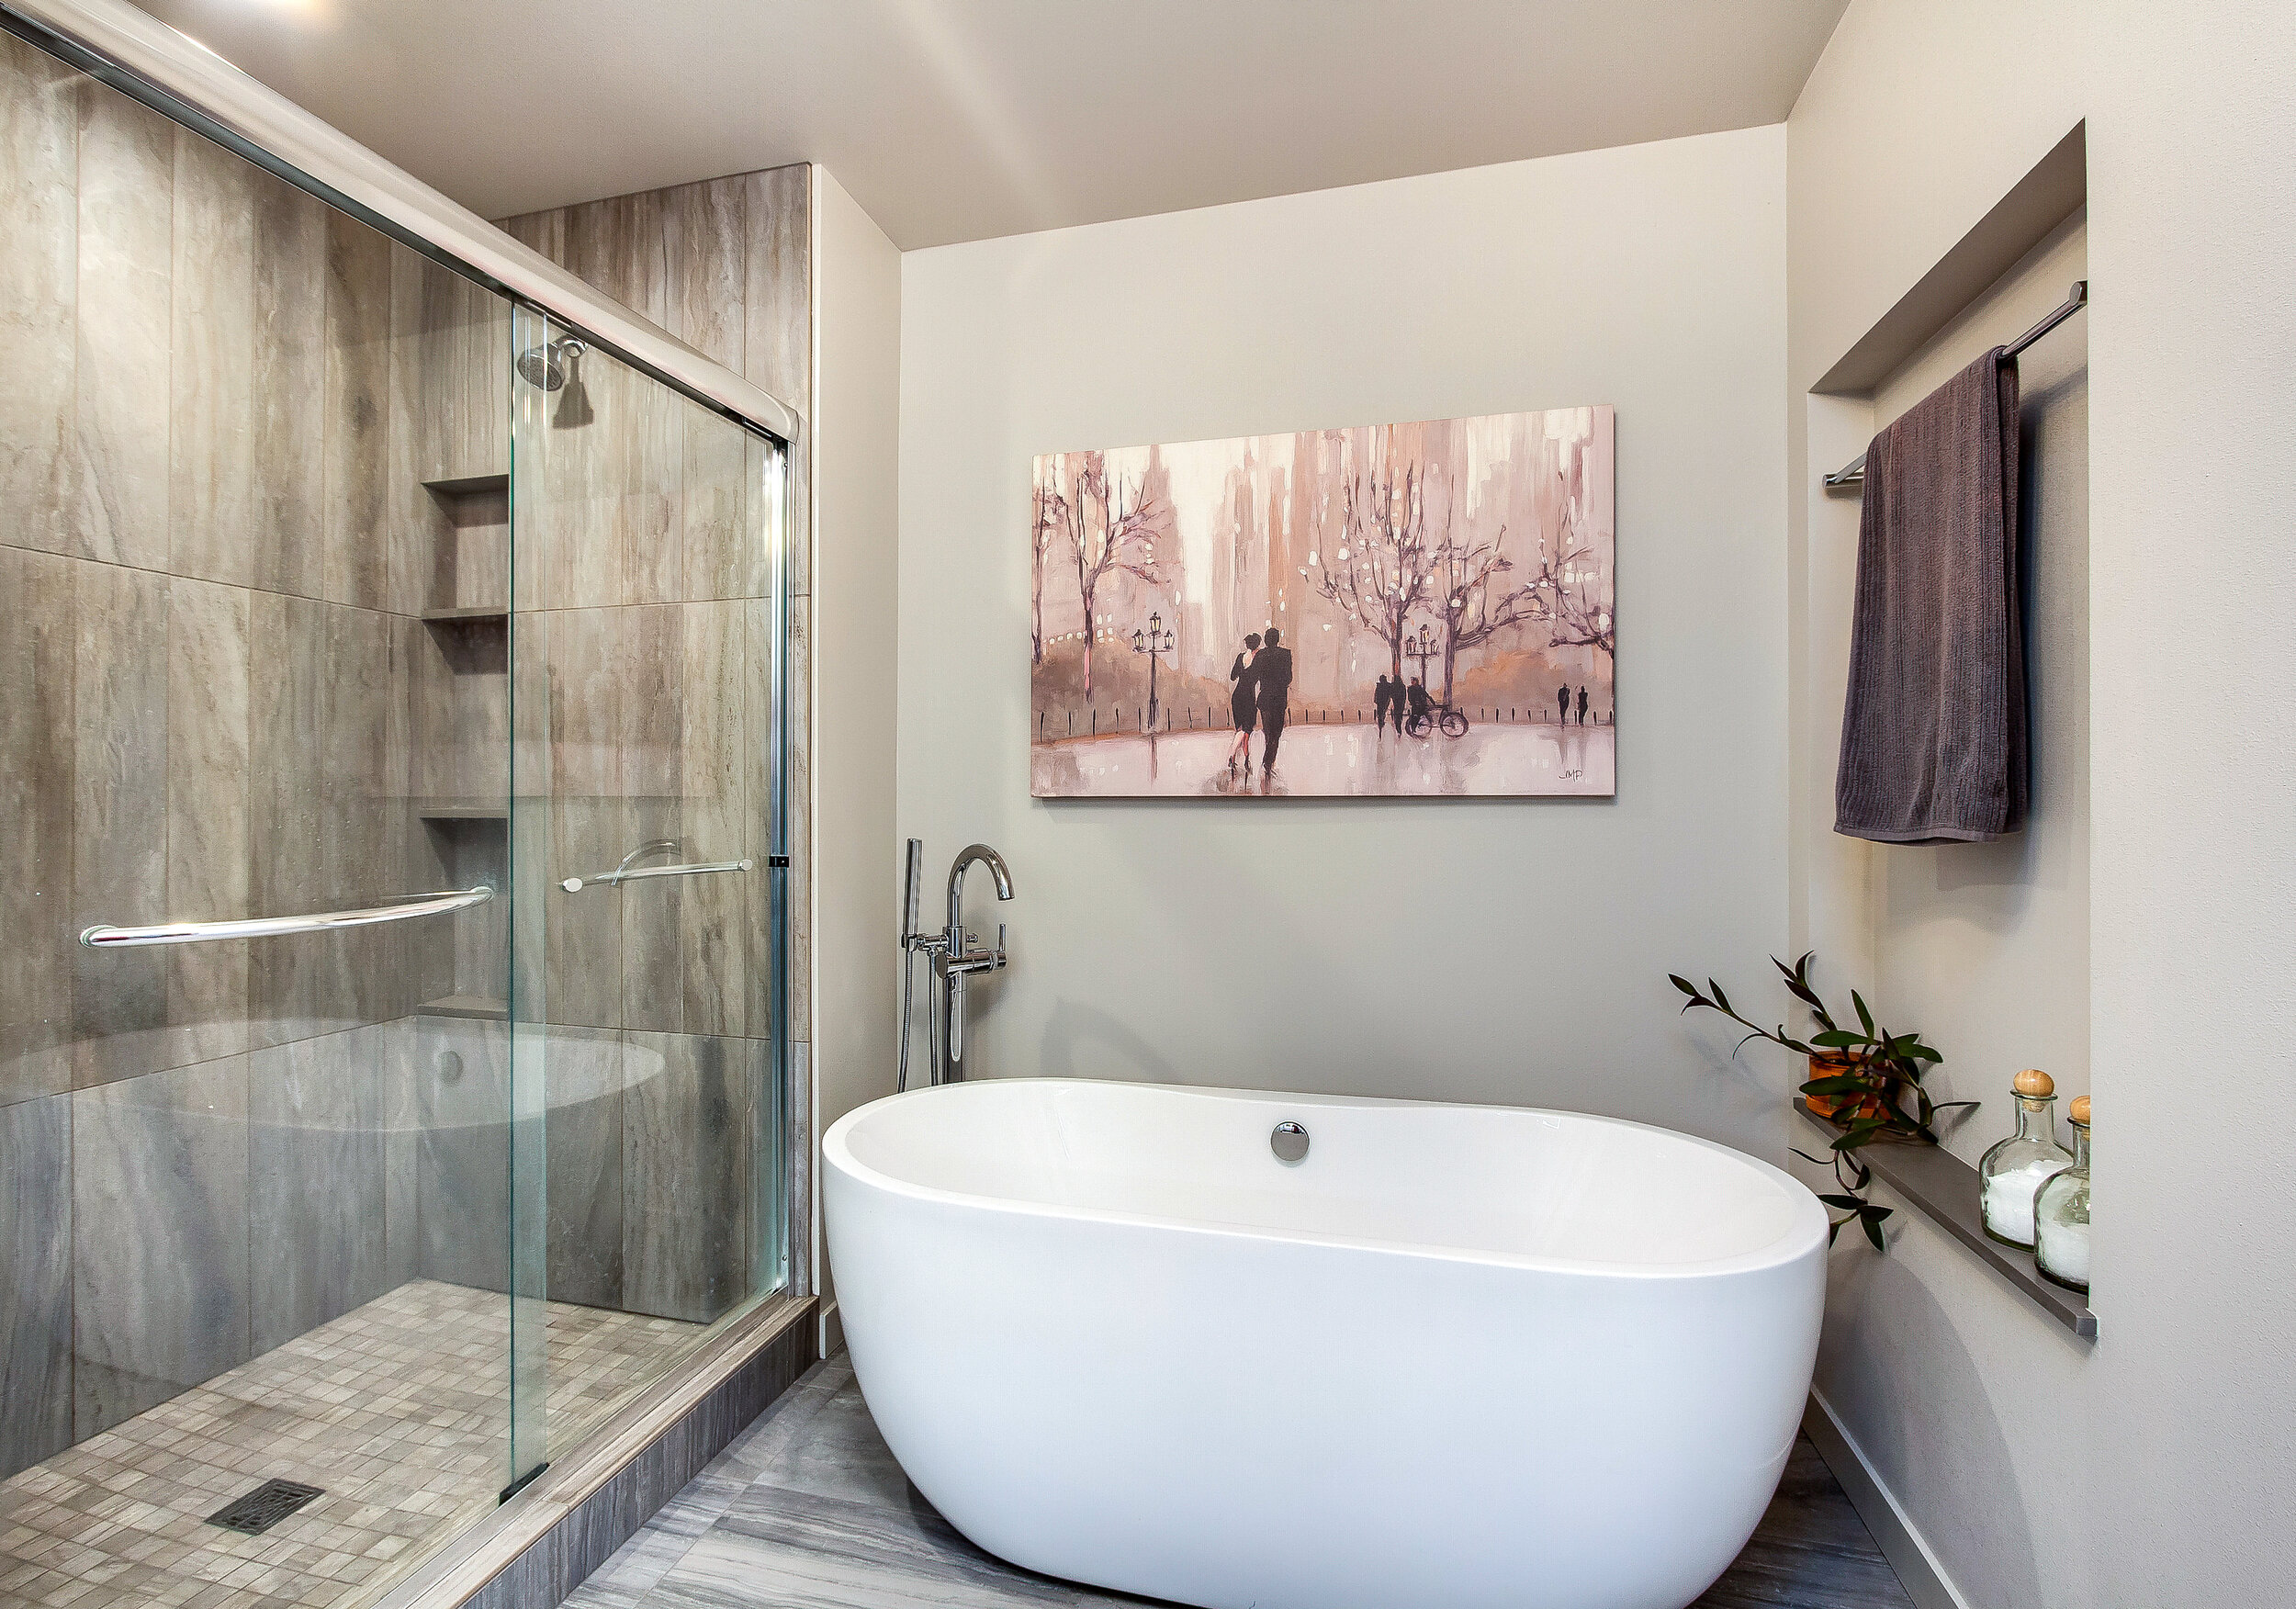 Complete with a spa-like design, the master bath offers a tranquil space to relax and refresh. 